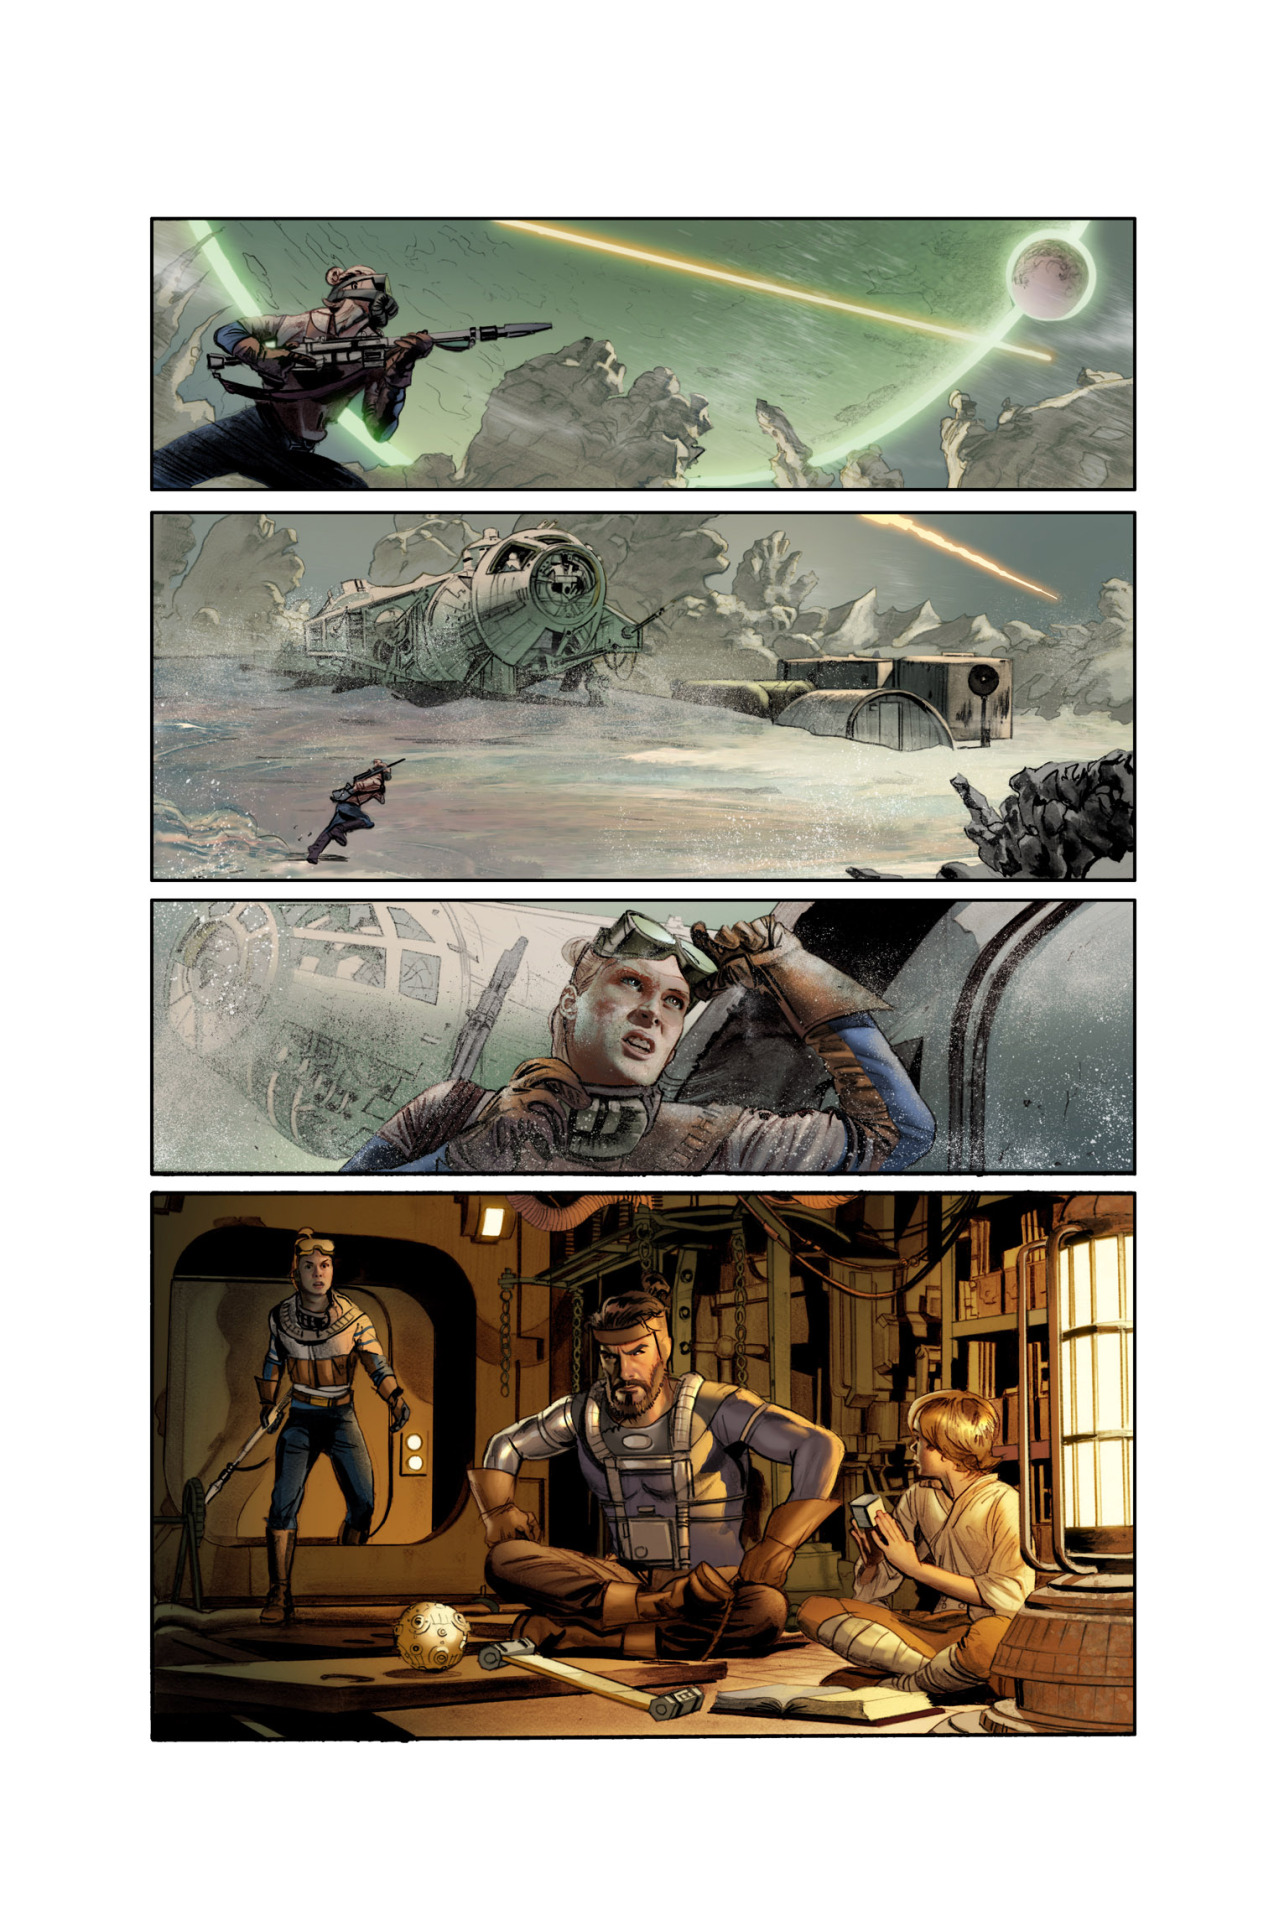 At this past weekend’s WonderCon, Dark Horse announced a project that has completely captured my imagination: a comic adaptation of George Lucas’ original script for Star Wars. From the press release:
“Three years before his 1977 film, George Lucas...